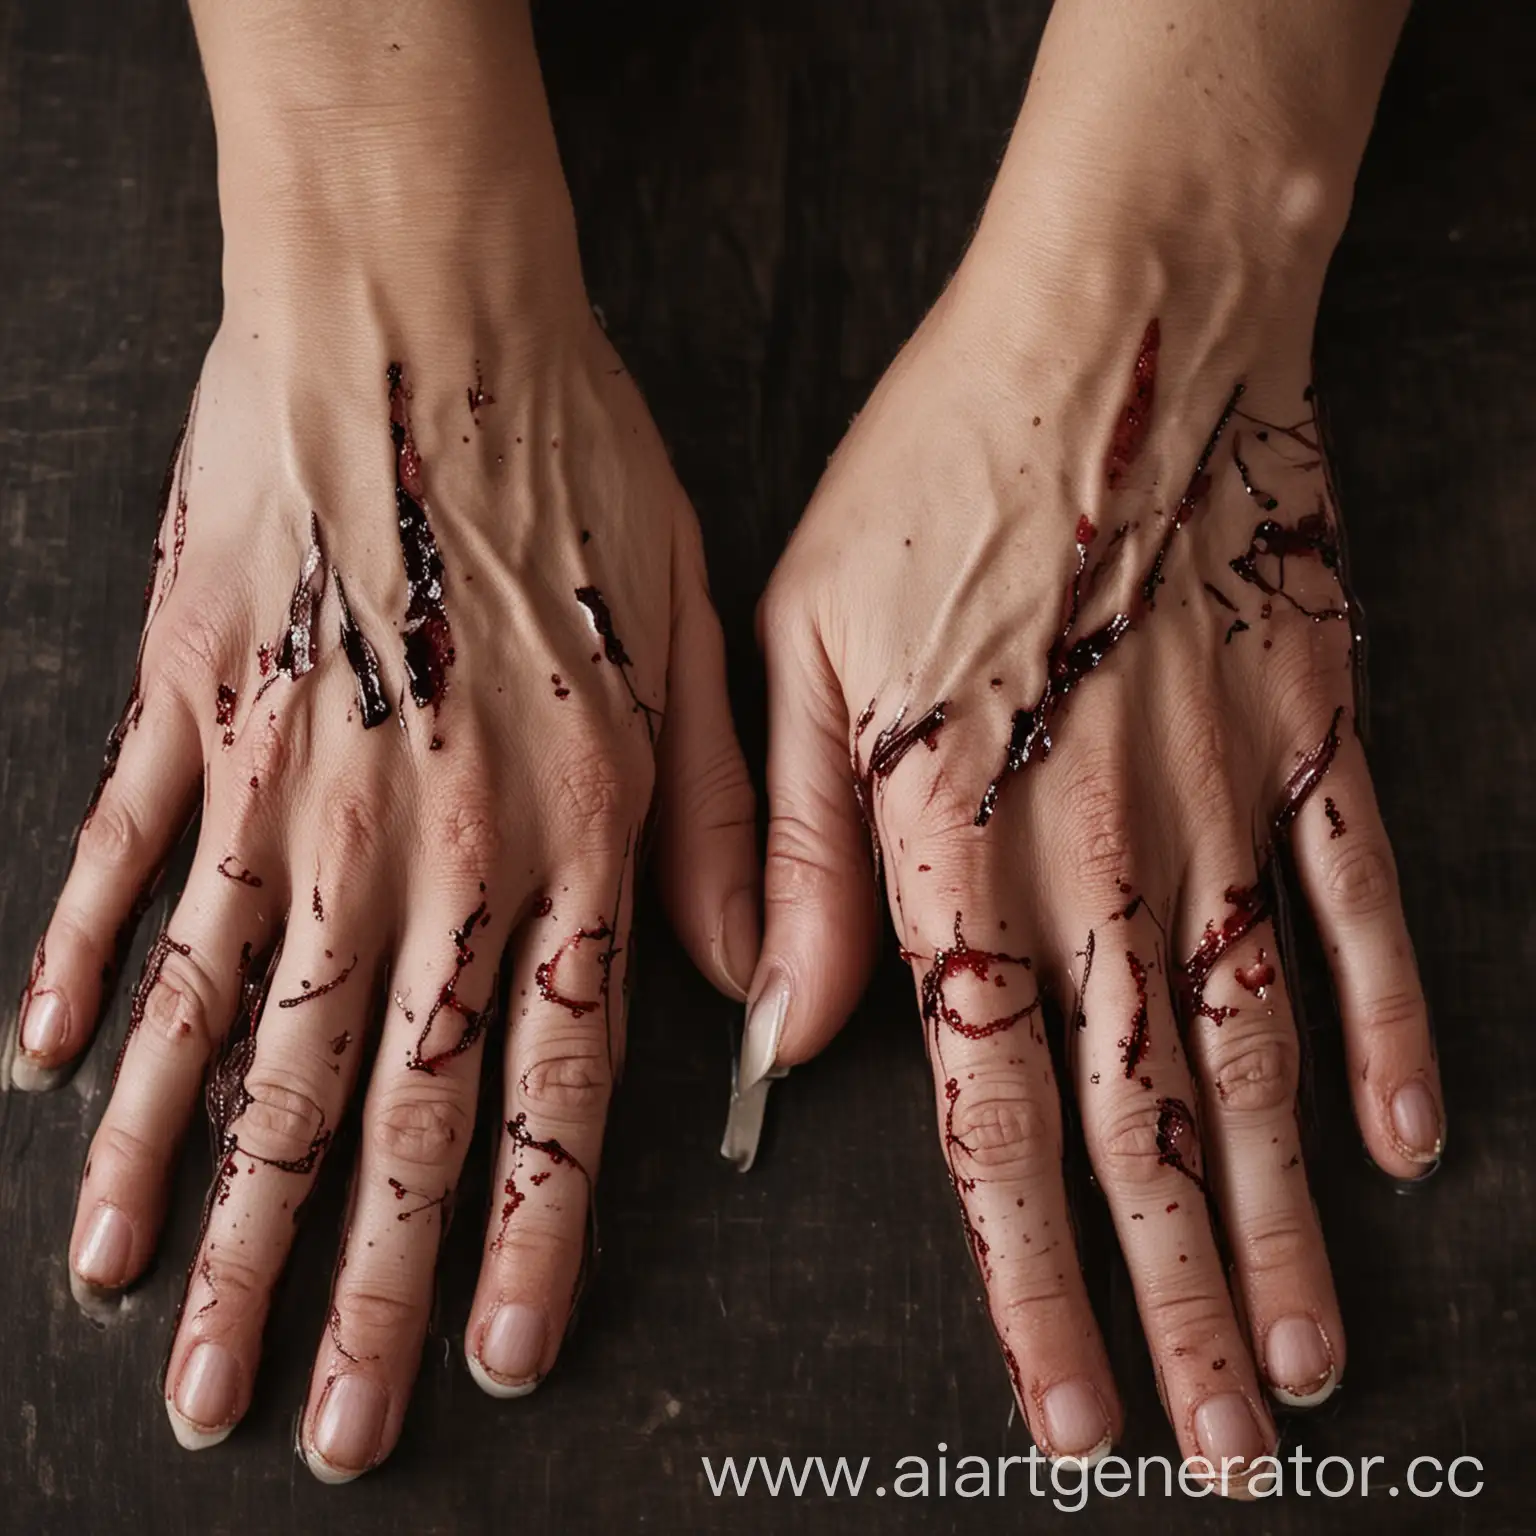 wounds in hands